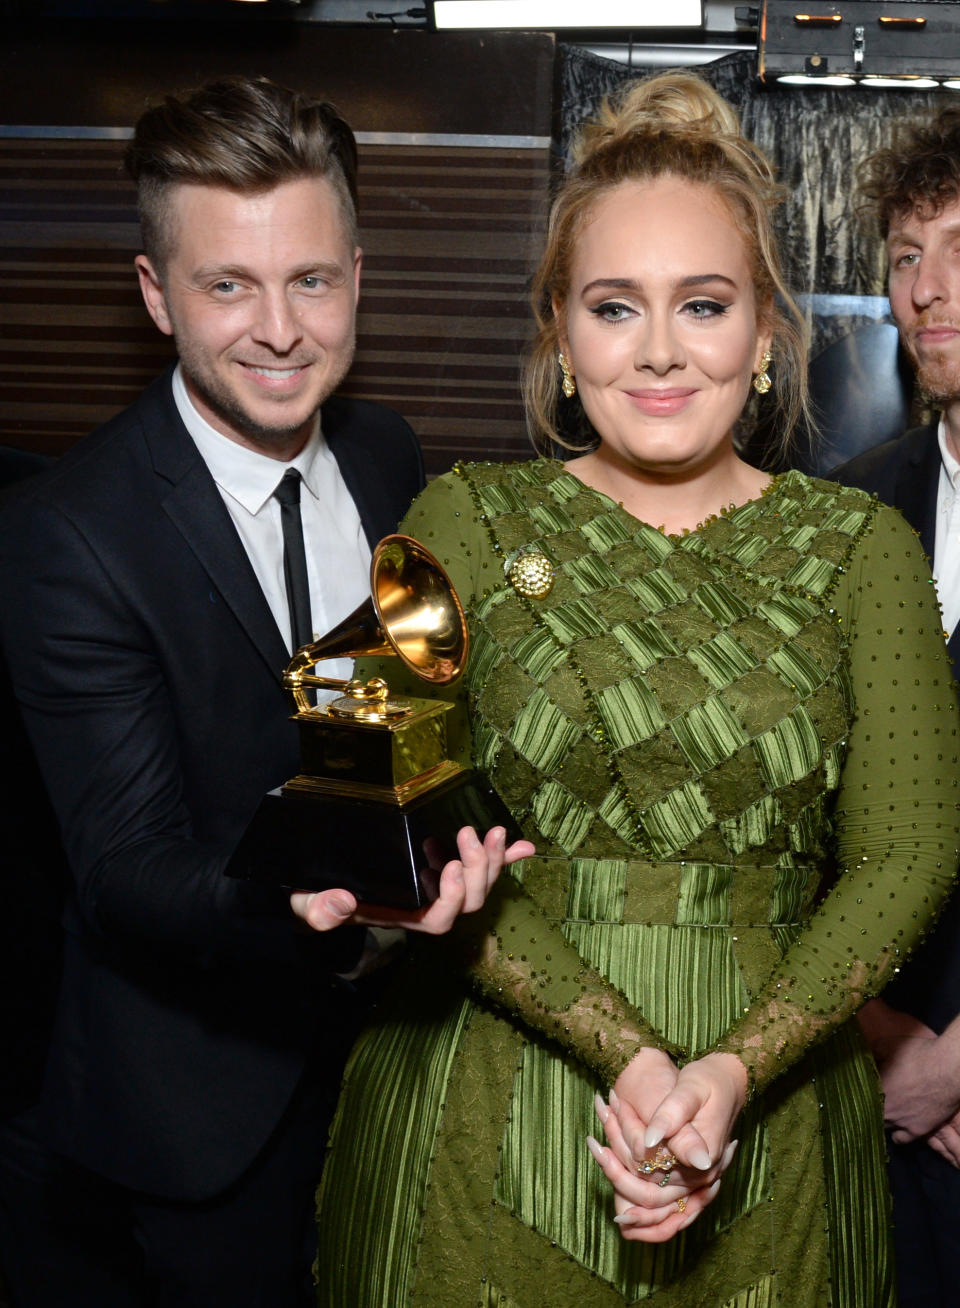 LOS ANGELES, CA - FEBRUARY 12:  Recording artist-producer Ryan Tedder (L) and recording artist Adele, co-recipients of the Album Of The Year award for '25,' pose backstage during the The 59th GRAMMY Awards at STAPLES Center on February 12, 2017 in Los Angeles, California.  (Photo by Michael Kovac/Getty Images for NARAS)